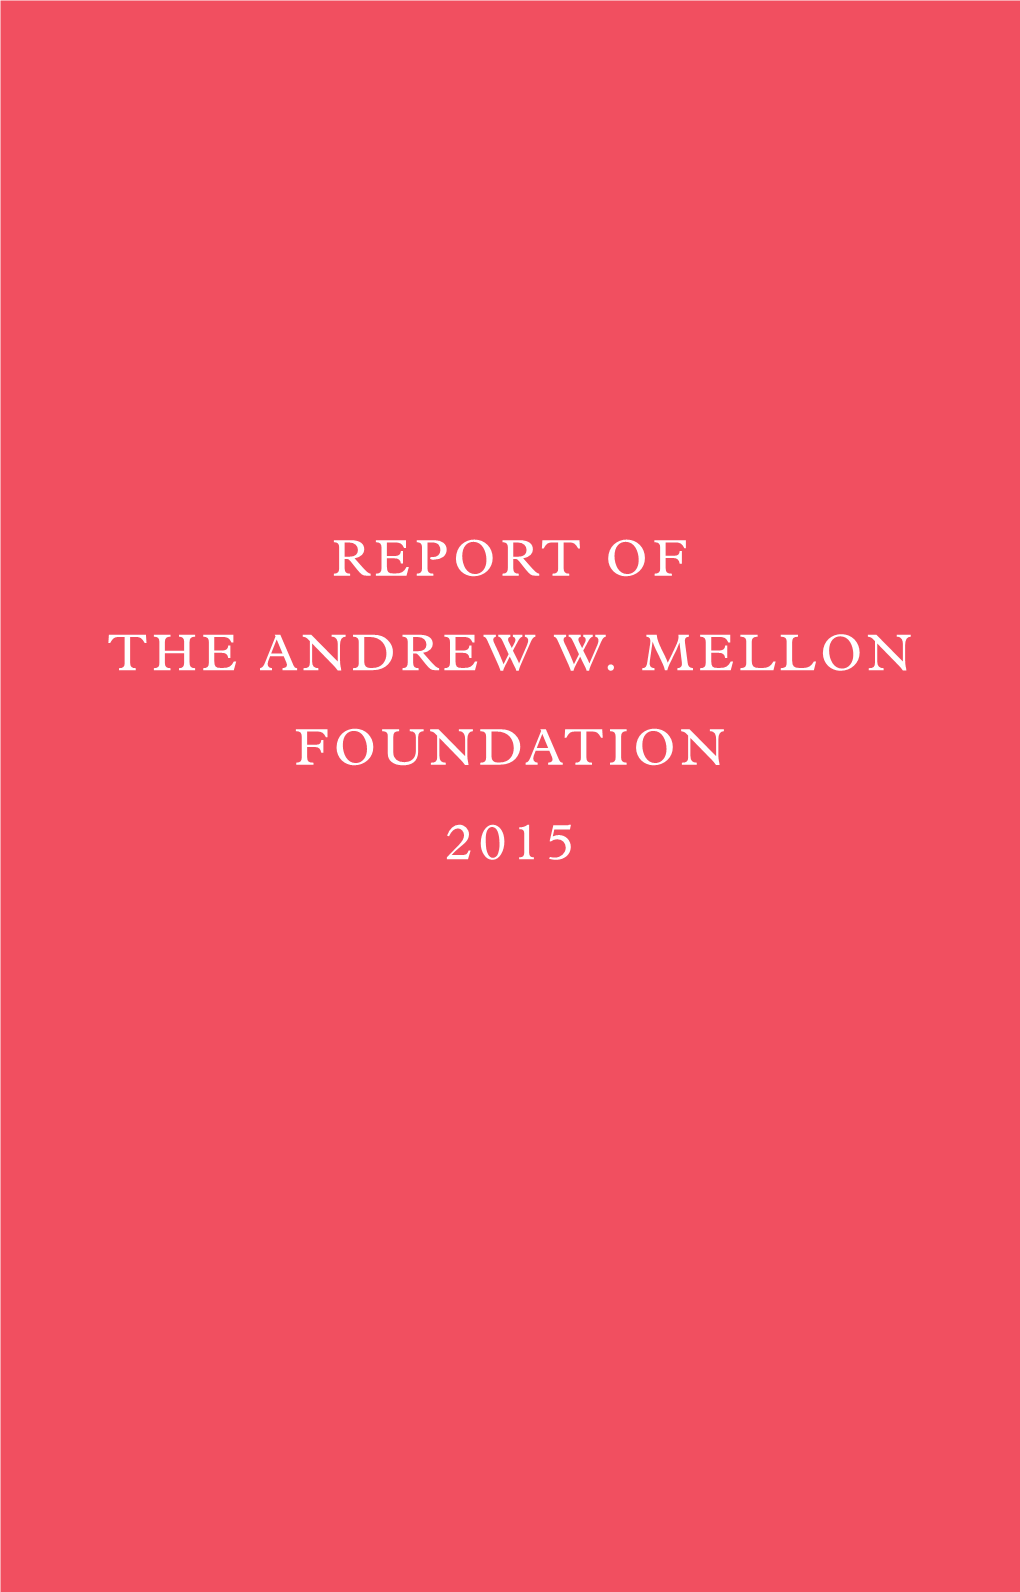 REPORT of the ANDREW W. MELLON FOUNDATION 2015 01 84952 Mellon Front 6/6/16 9:52 AM Page 1